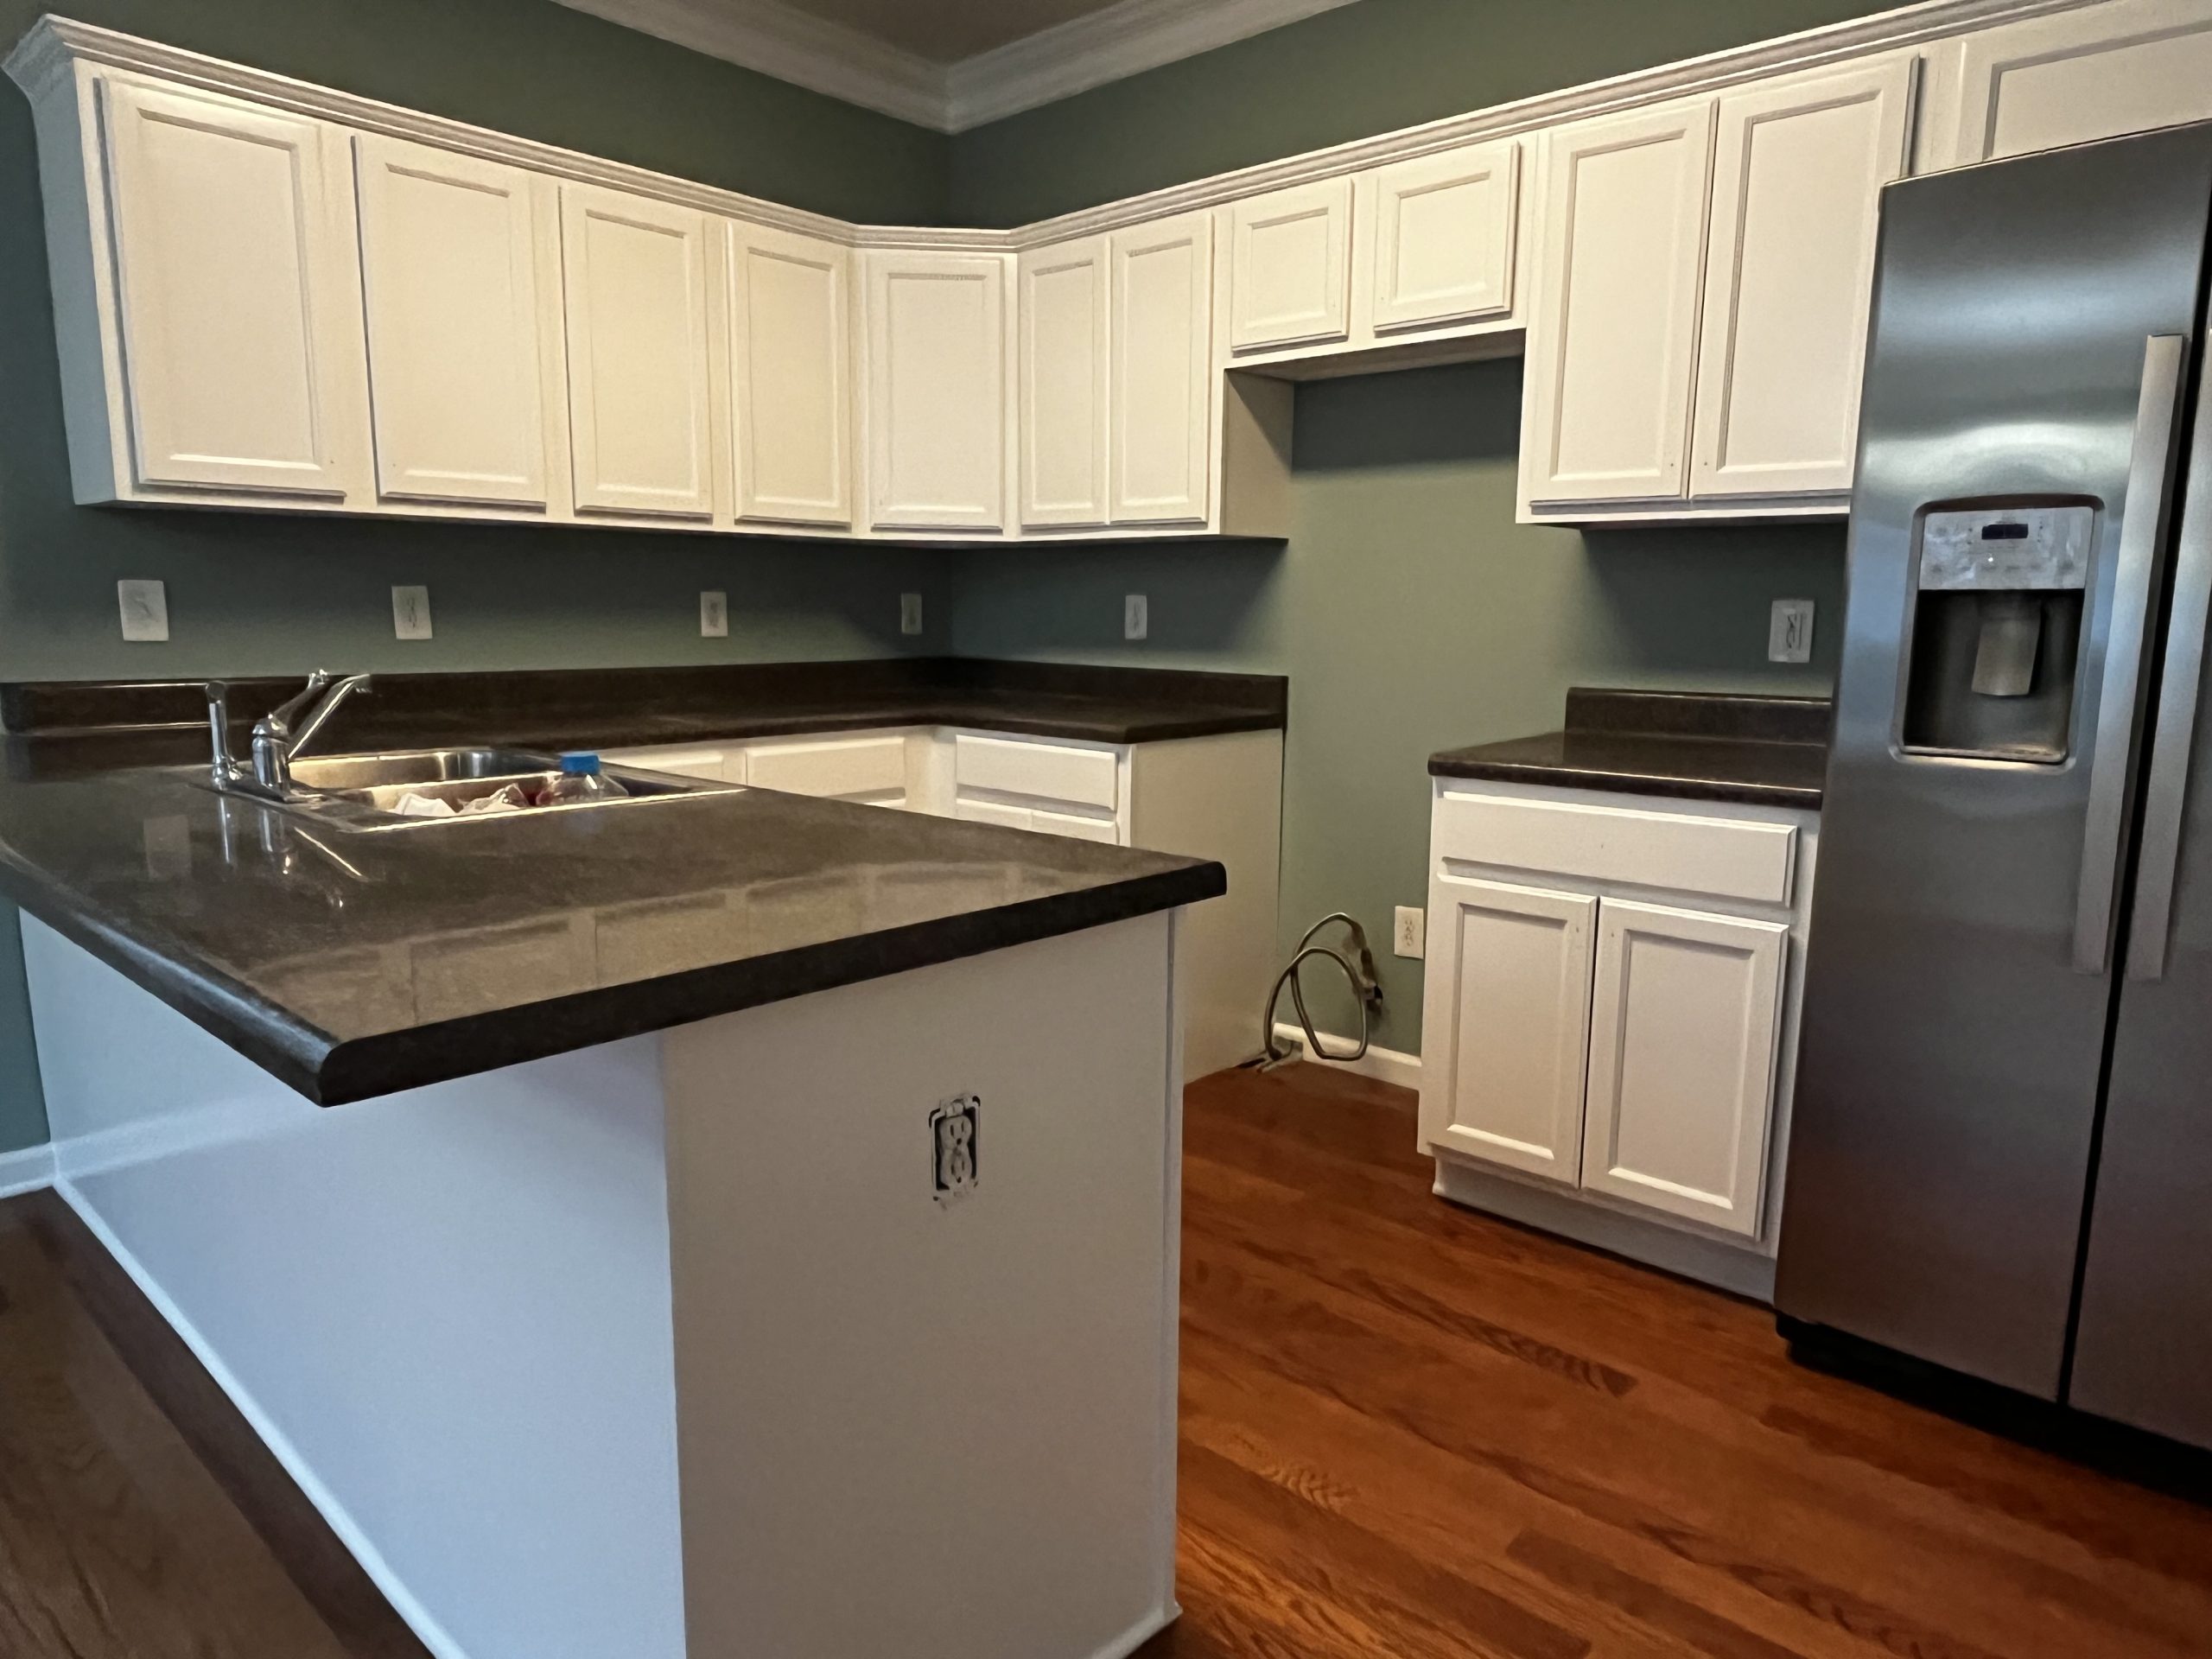 Kitchen in Tyrone, GA, after completed residential interior and kitchen cabinet painting project by CertaPro Painters of Peachtree City/Coweta County, GA